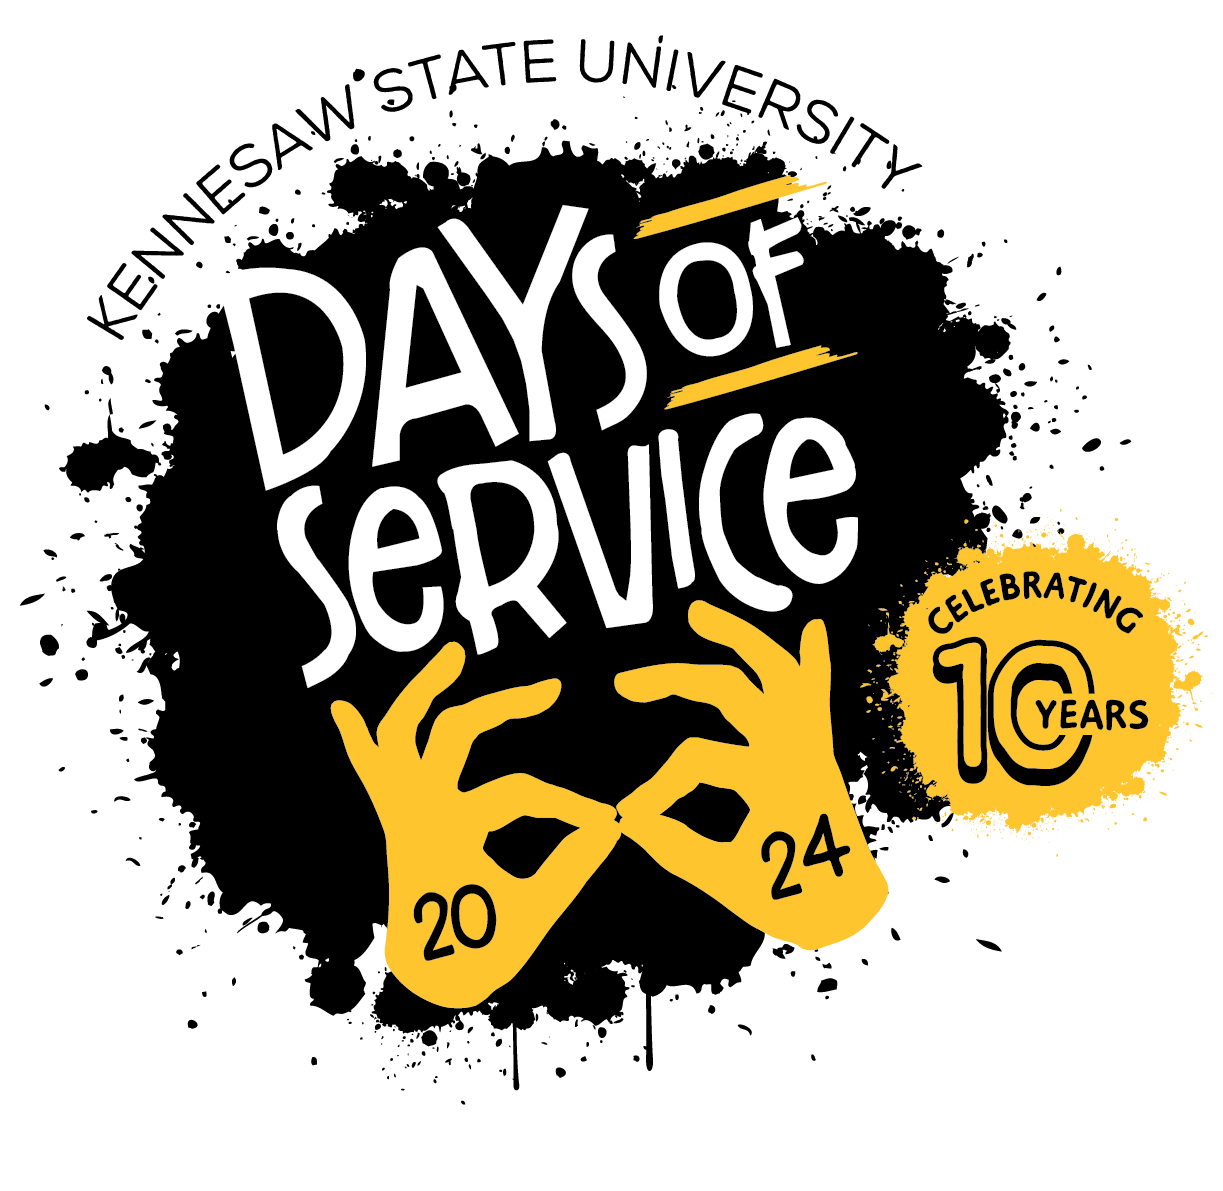 10 year days of service